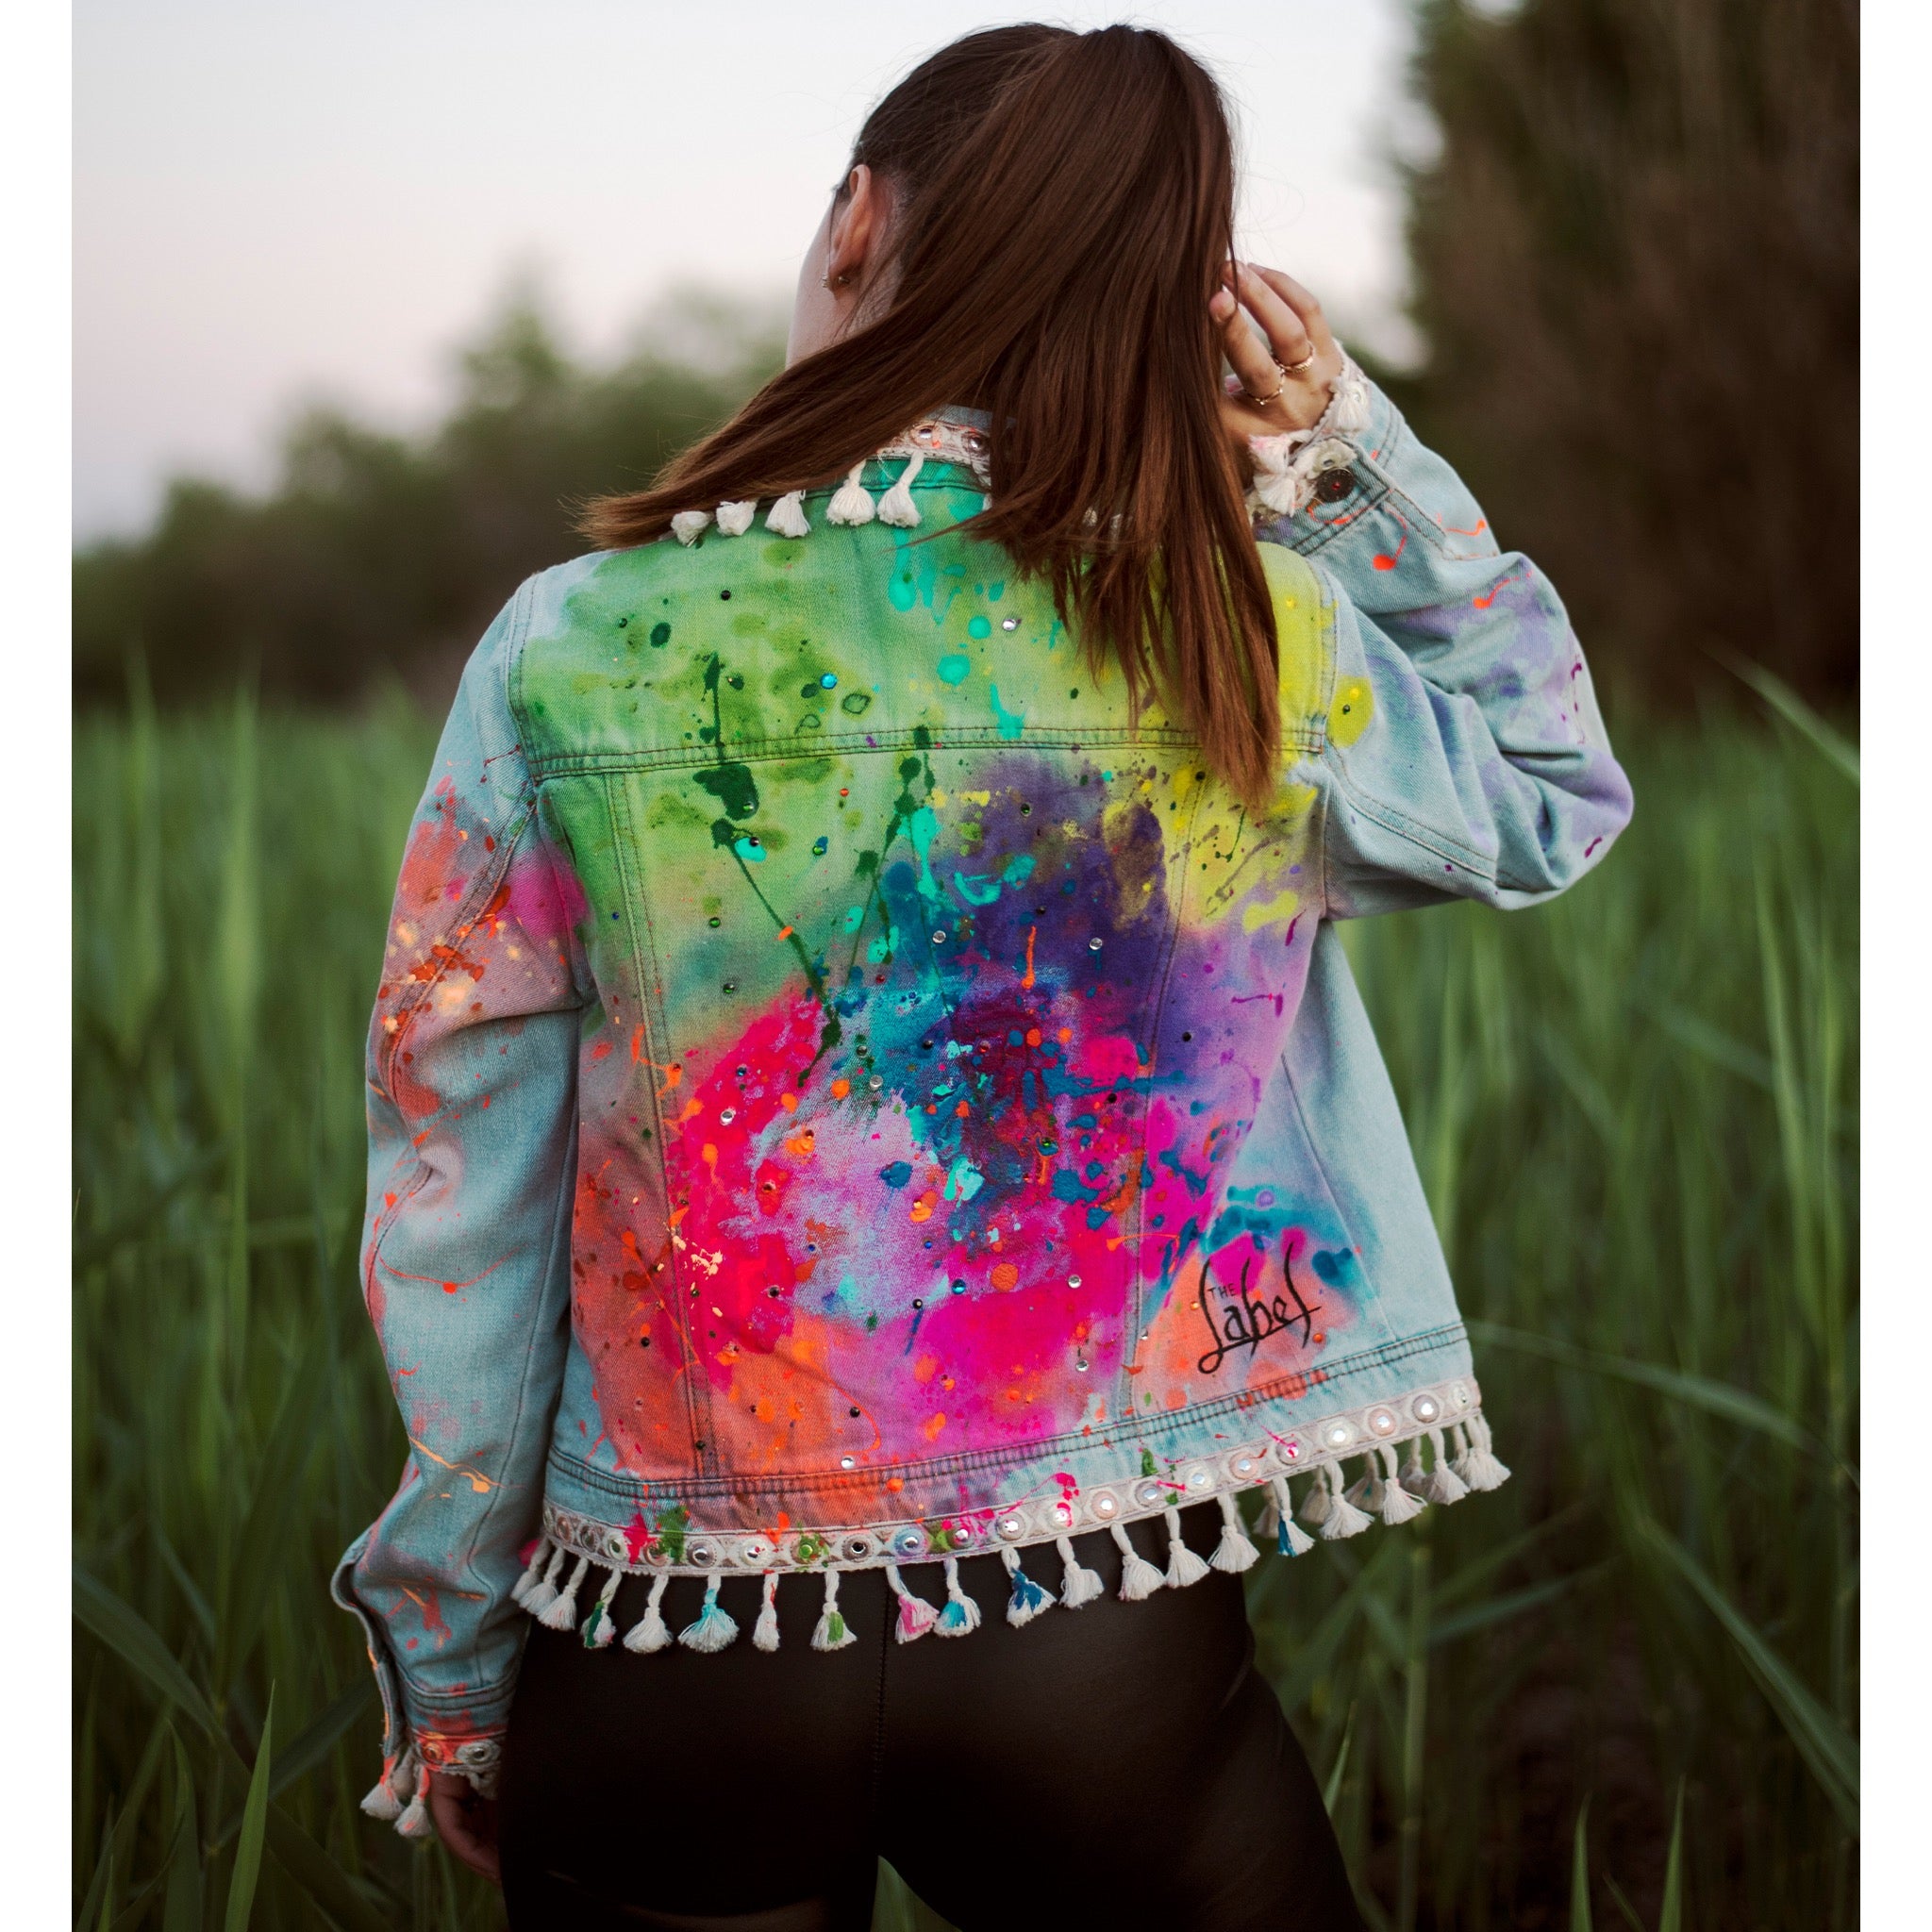 Neon Explosion - Hand-Painted Denim Jacket | The Label Official